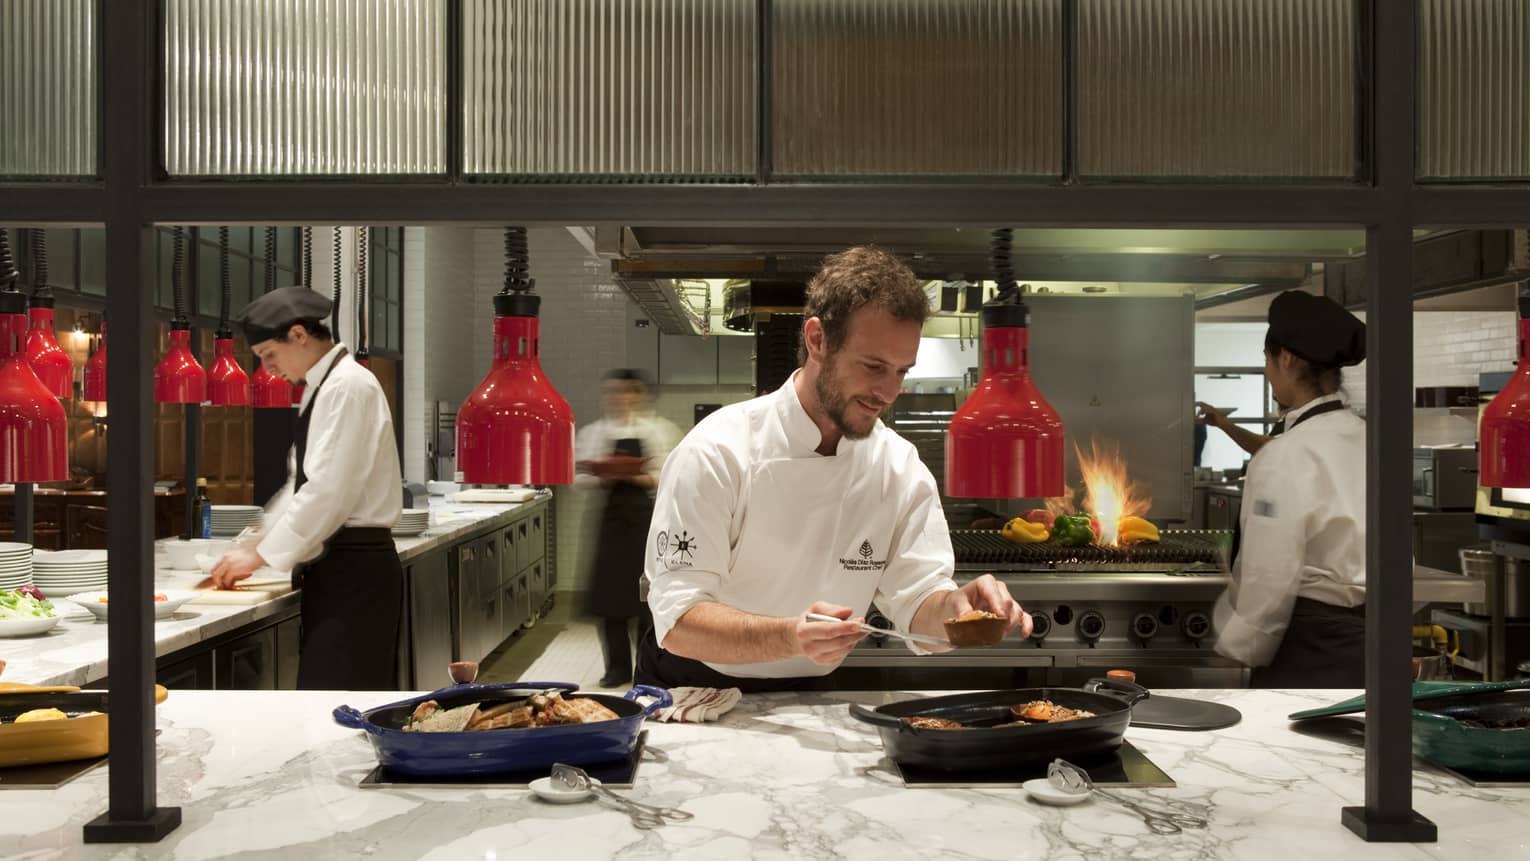 Chefs assemble dishes in a bustling kitchen, lit by red lights